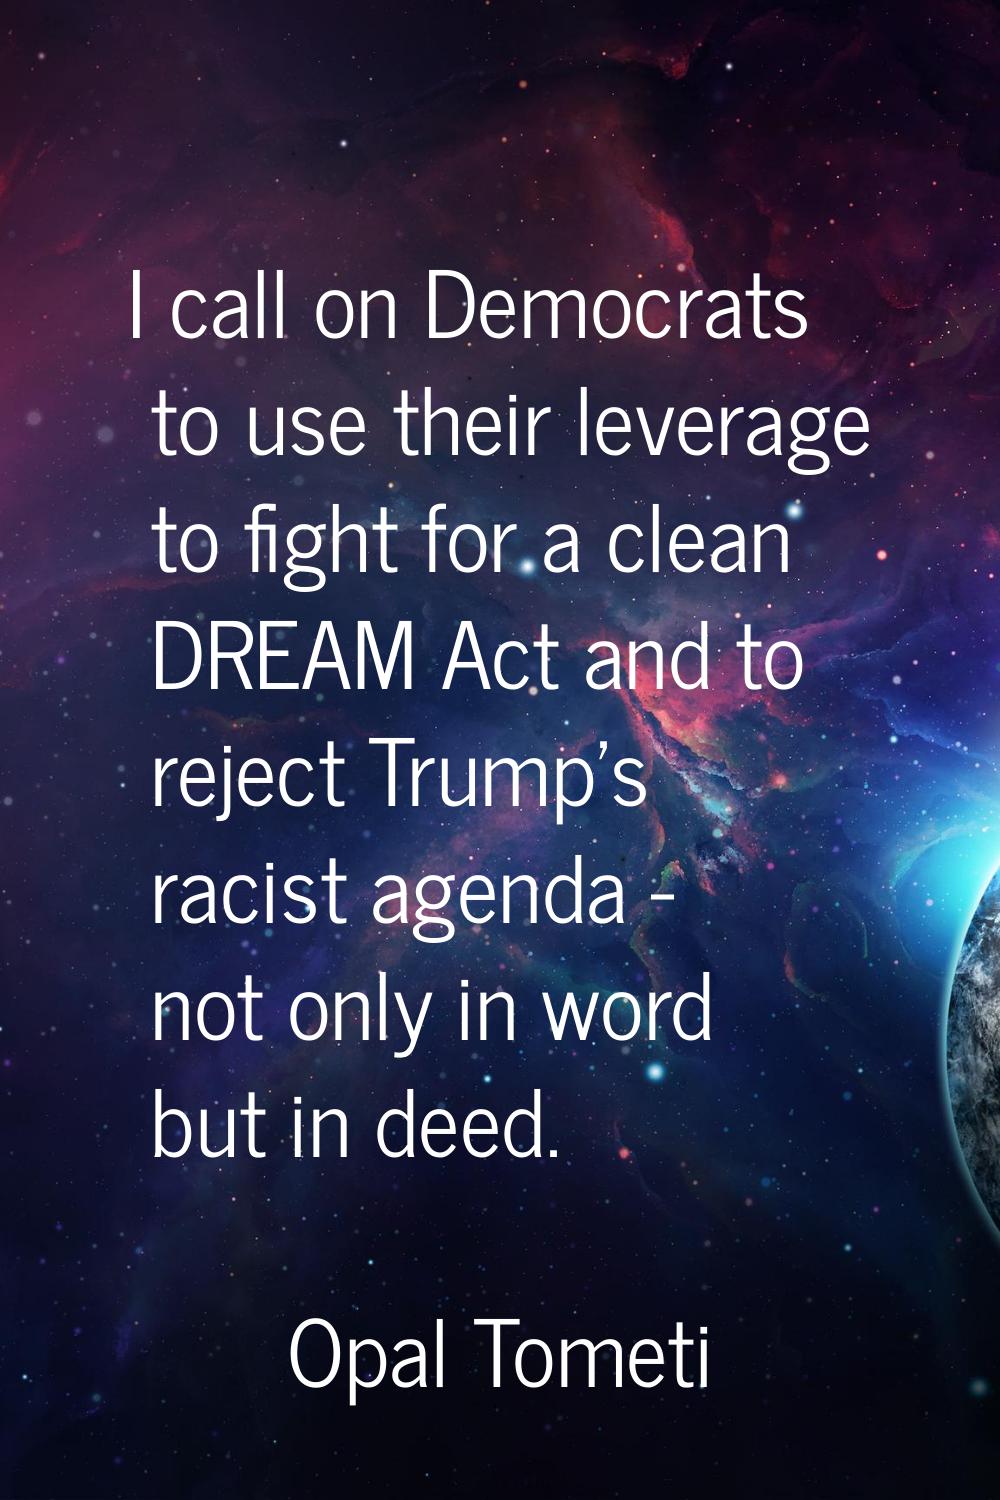 I call on Democrats to use their leverage to fight for a clean DREAM Act and to reject Trump's raci